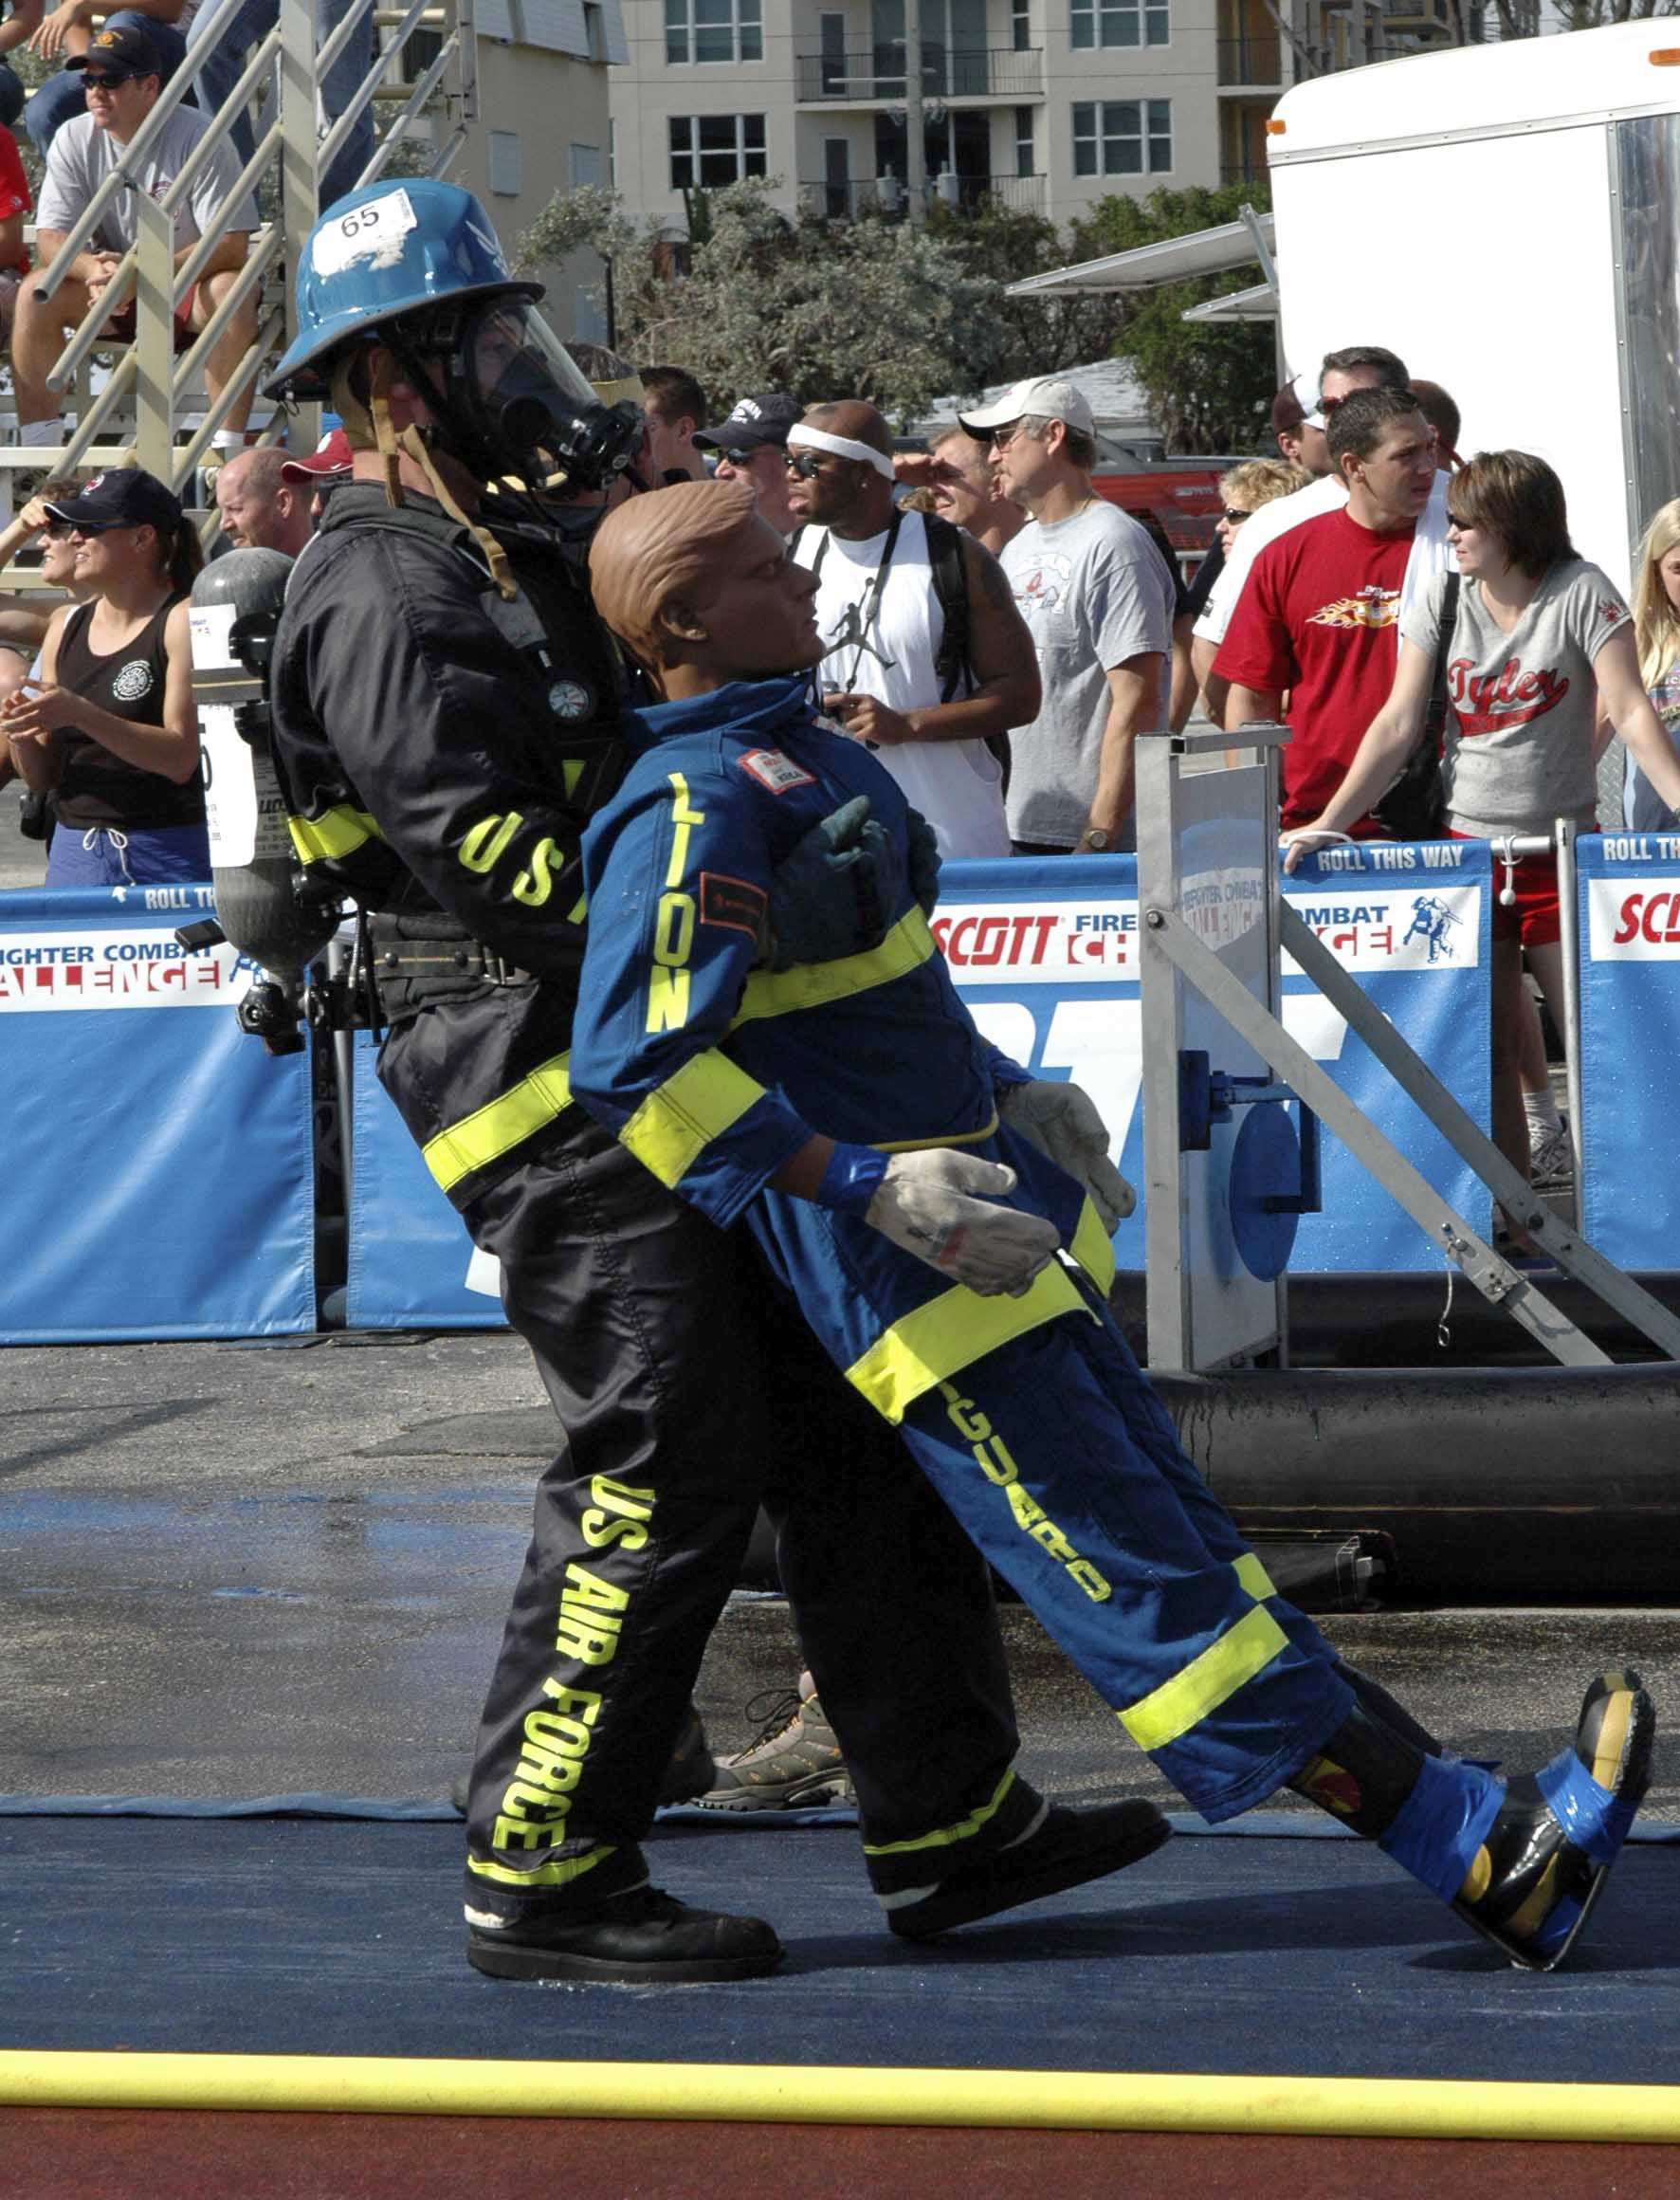 Firefighters compete in World Firefighter Combat Challenge > Air Force